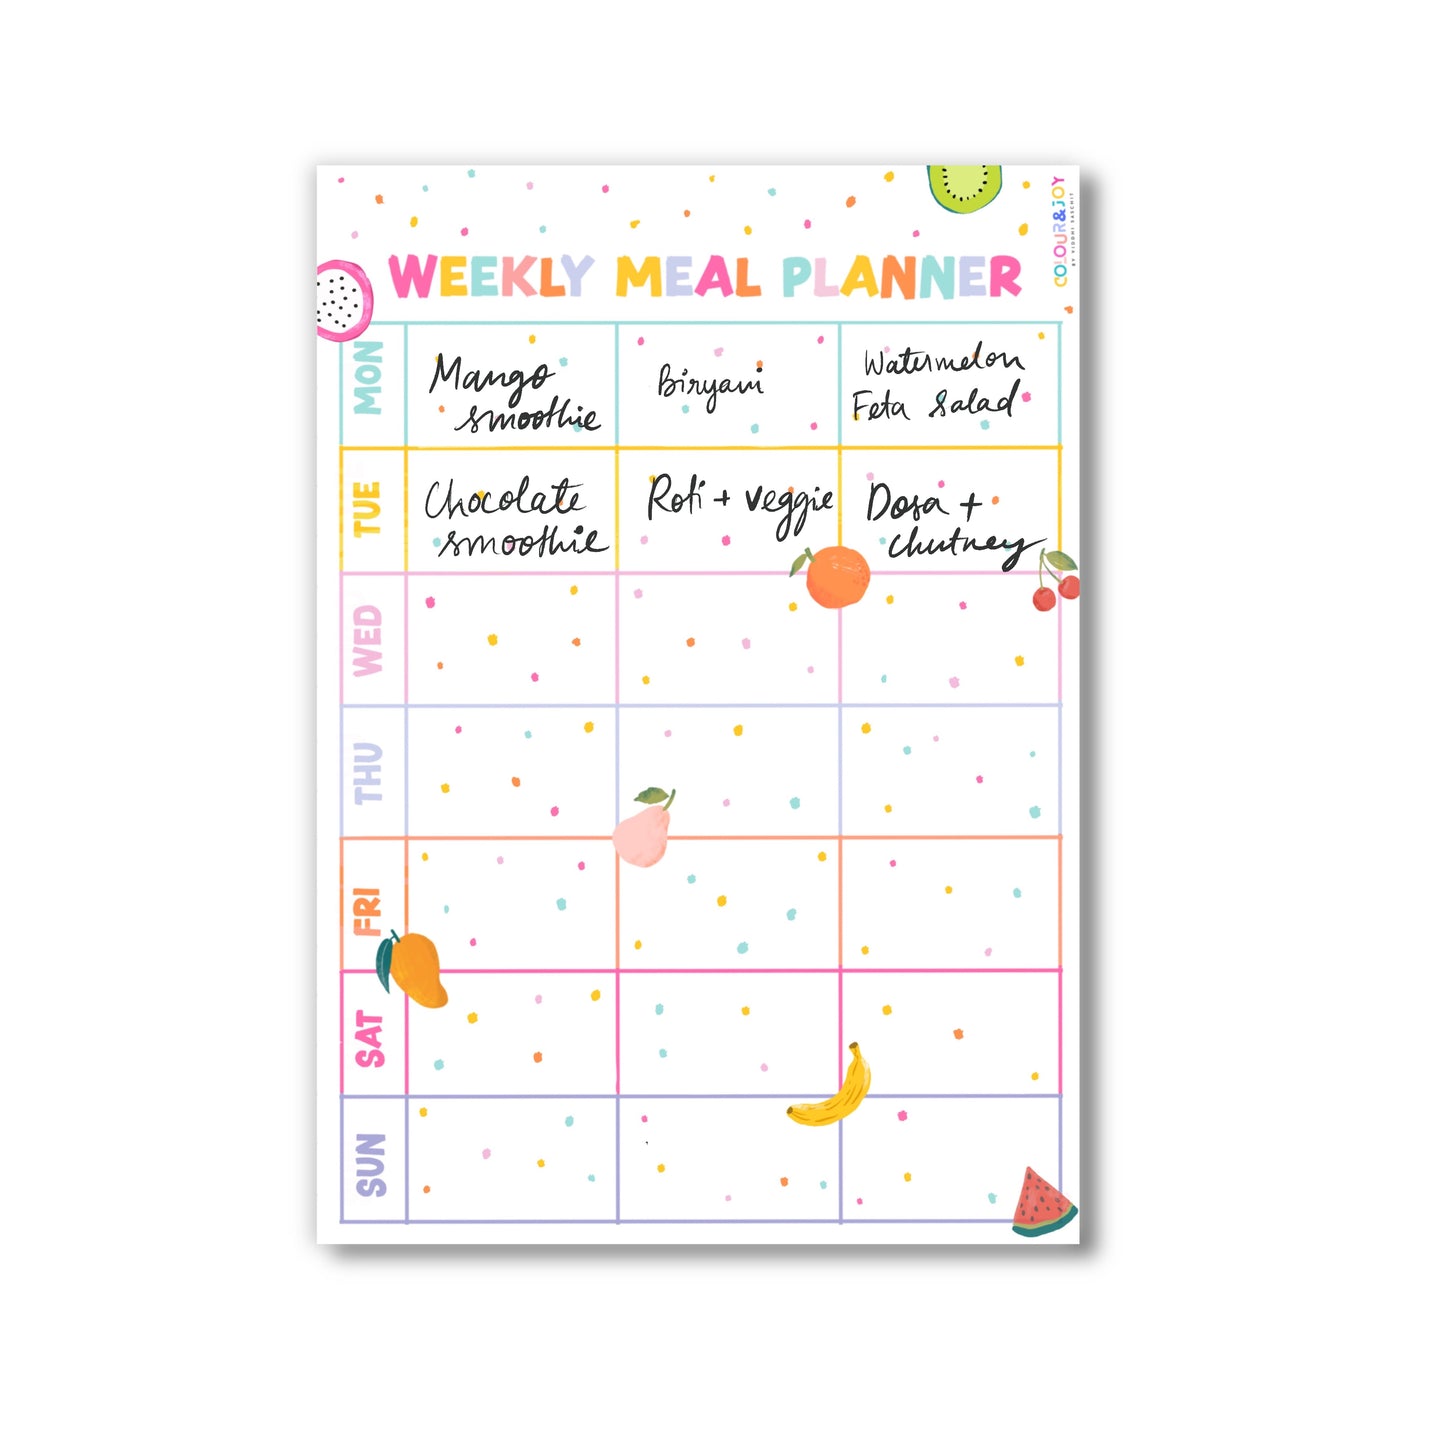 Weekly Meal Planner (2) - A4 (8.3"x11.7")